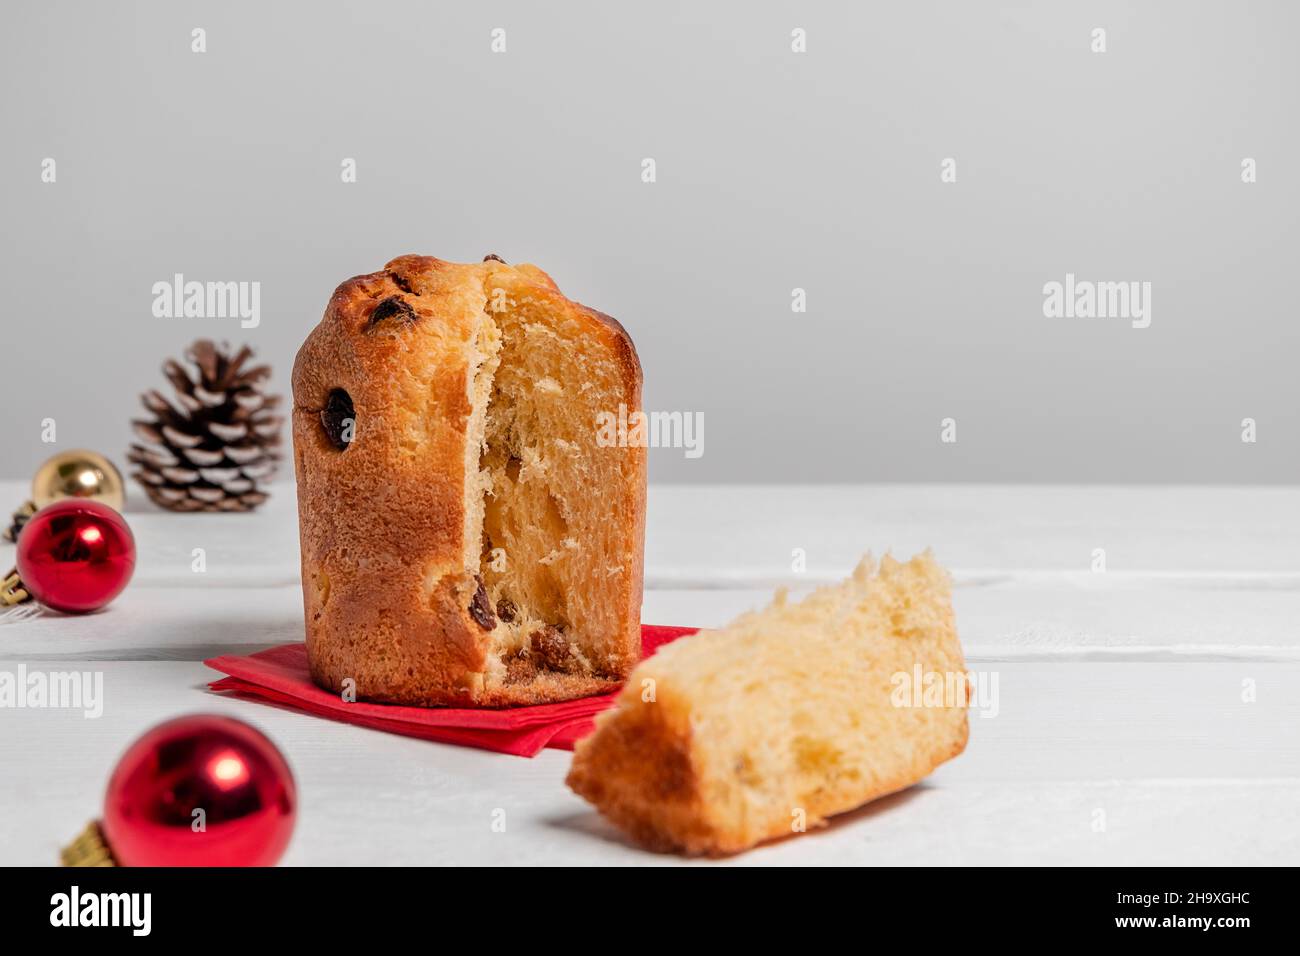 Italian dessert mini panettone surrounded by Christmas decorations on white background with copy space. Christmas or new year pastry food concept Stock Photo